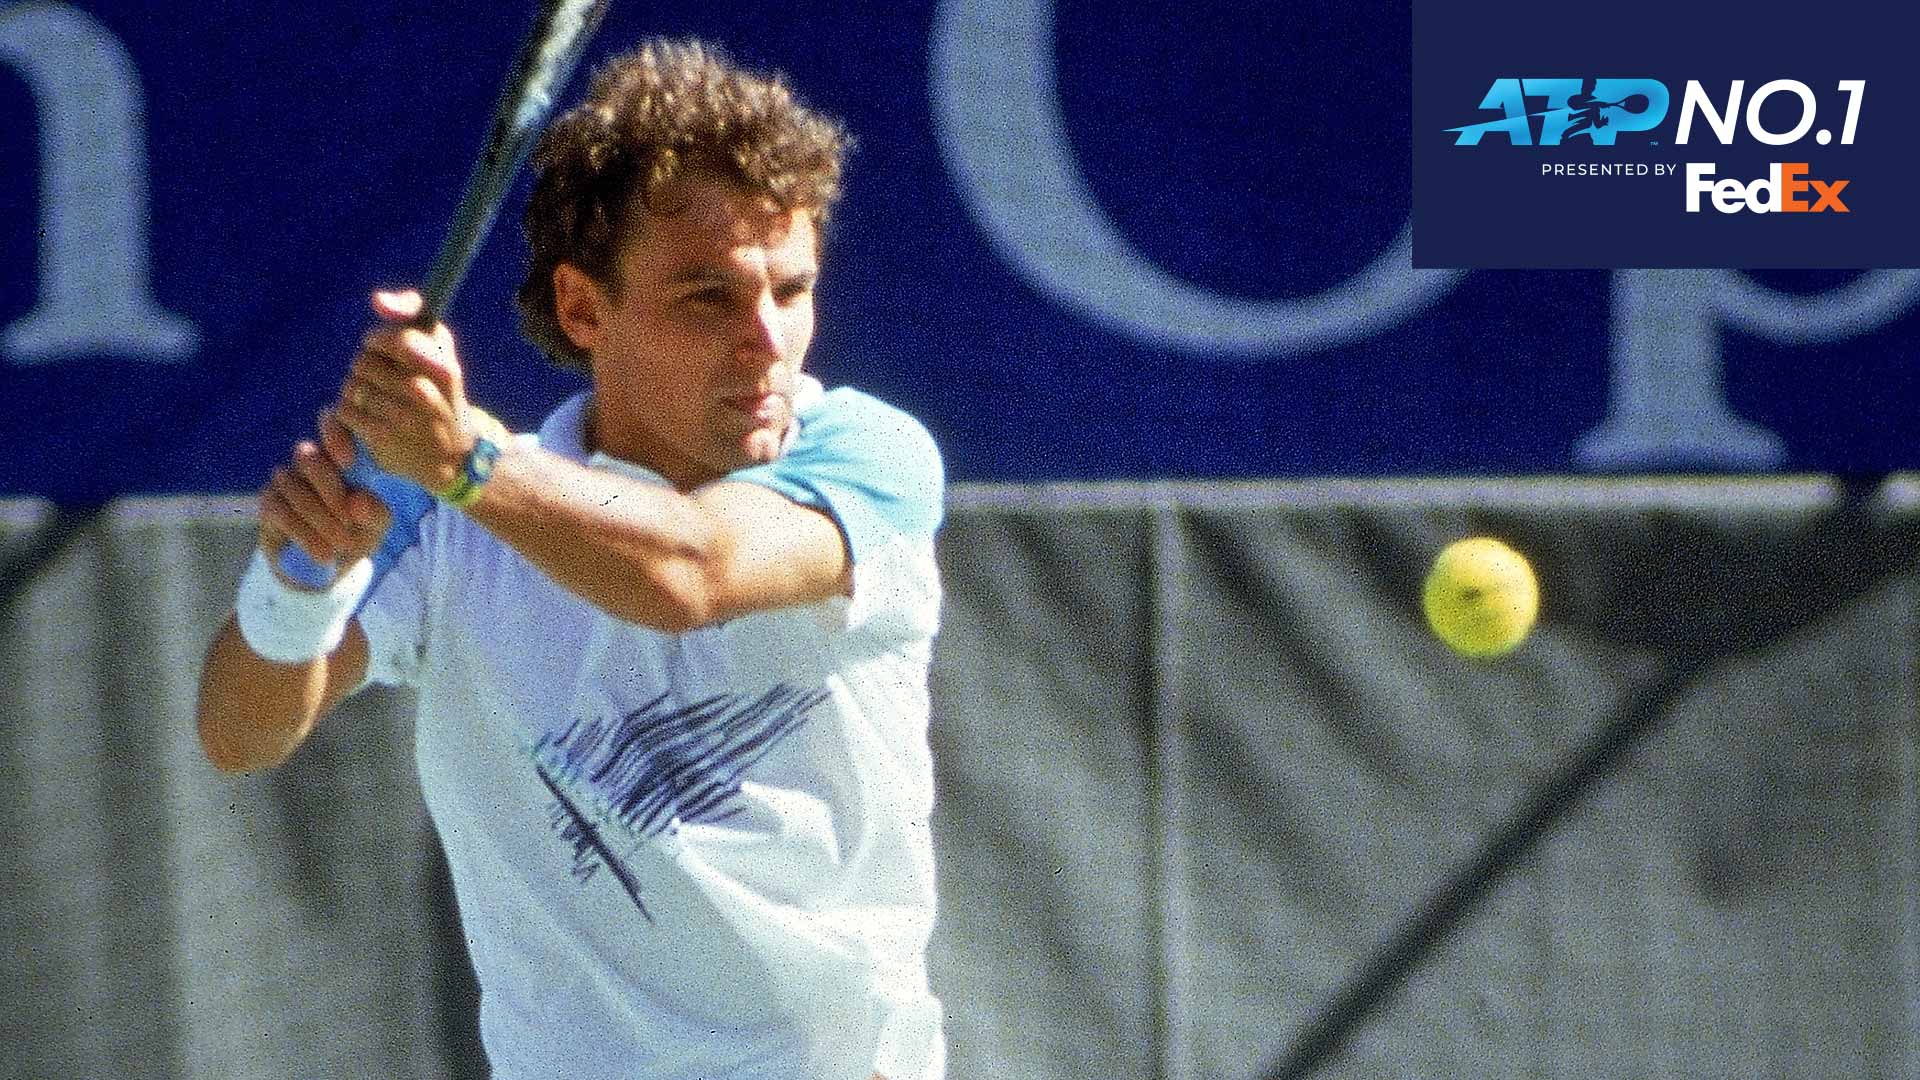 Sweden's Mats Wilander followed in the footsteps of his idol, Bjorn Borg, by rising to No. 1 in the FedEx ATP Rankings in September 1988.